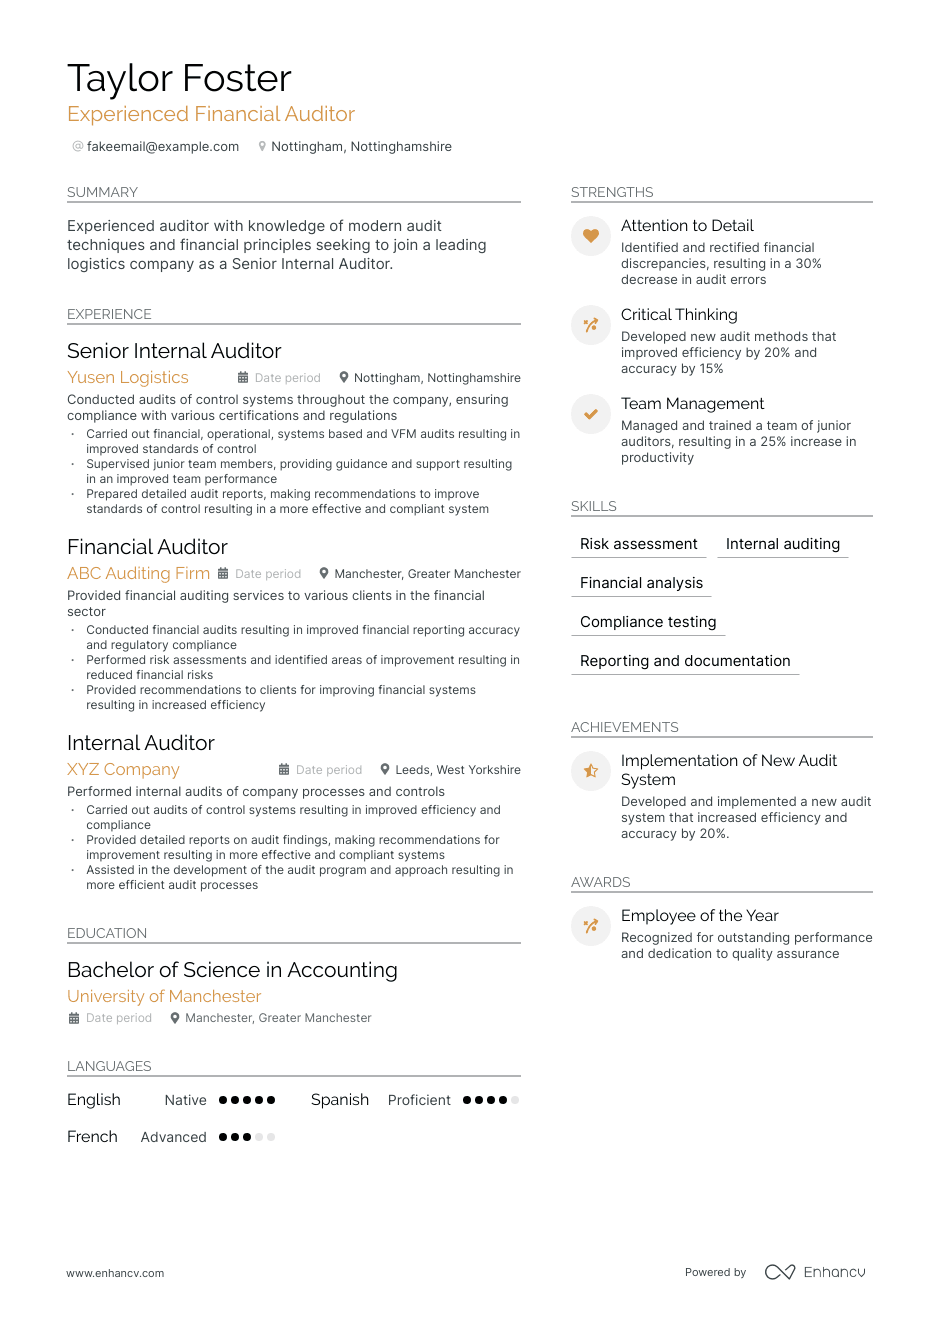 Financial Auditor resume example